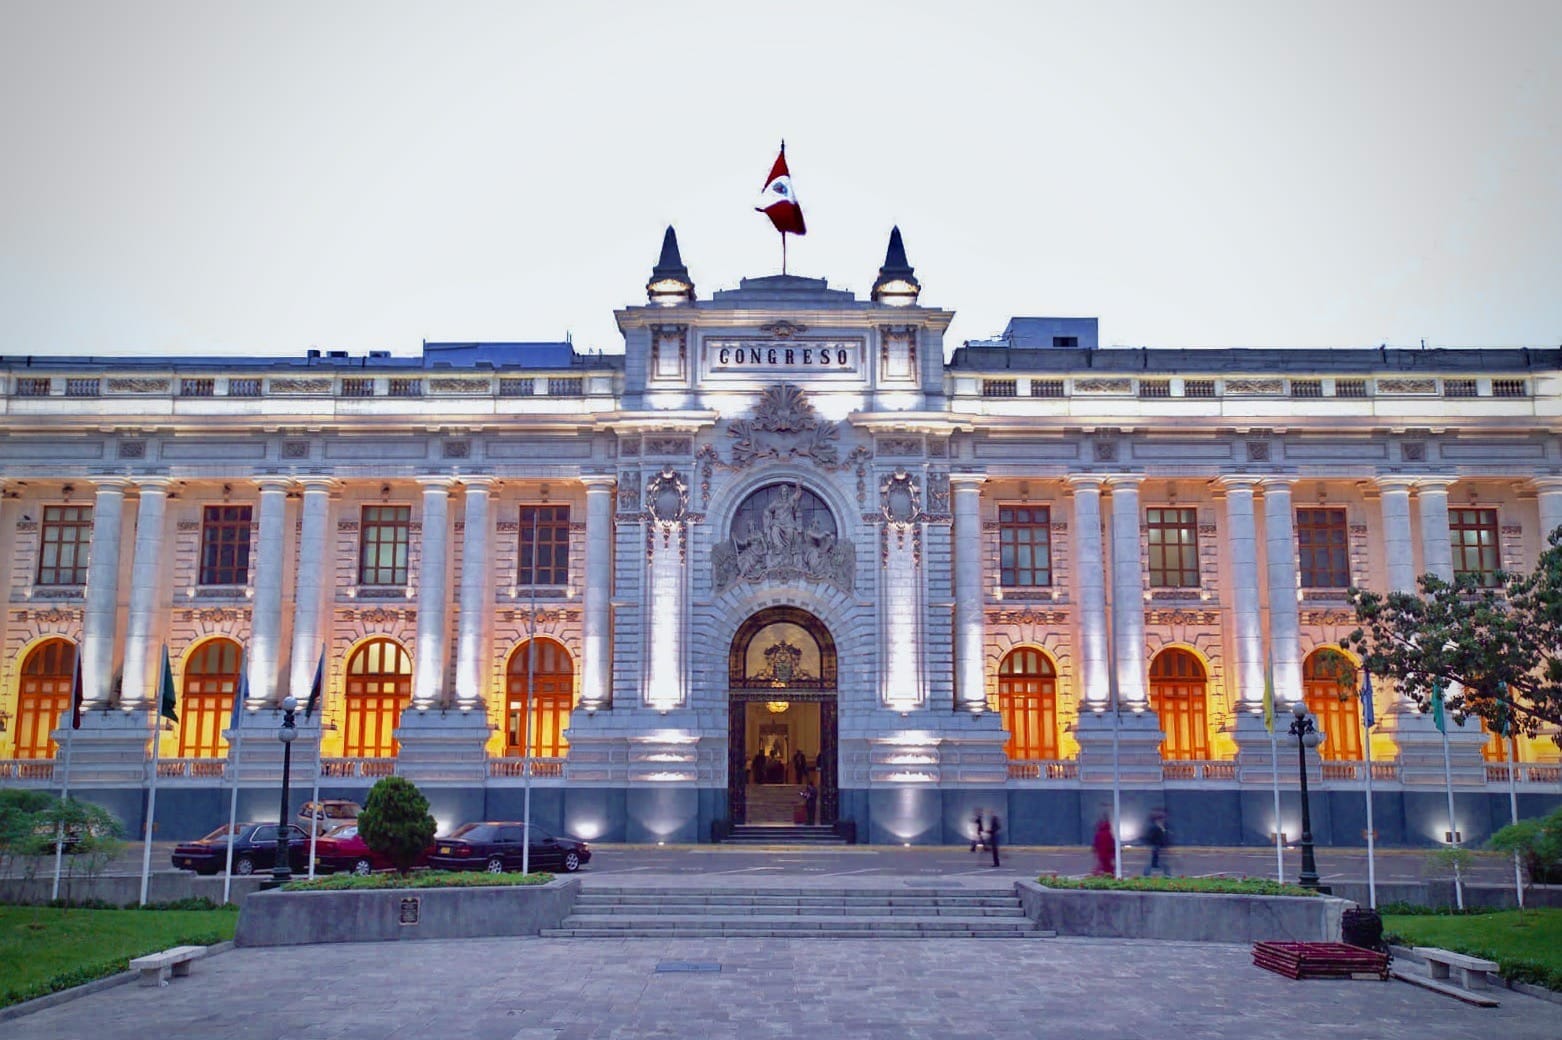 The Congress of Peru reviewed its highly criticised gaming law.